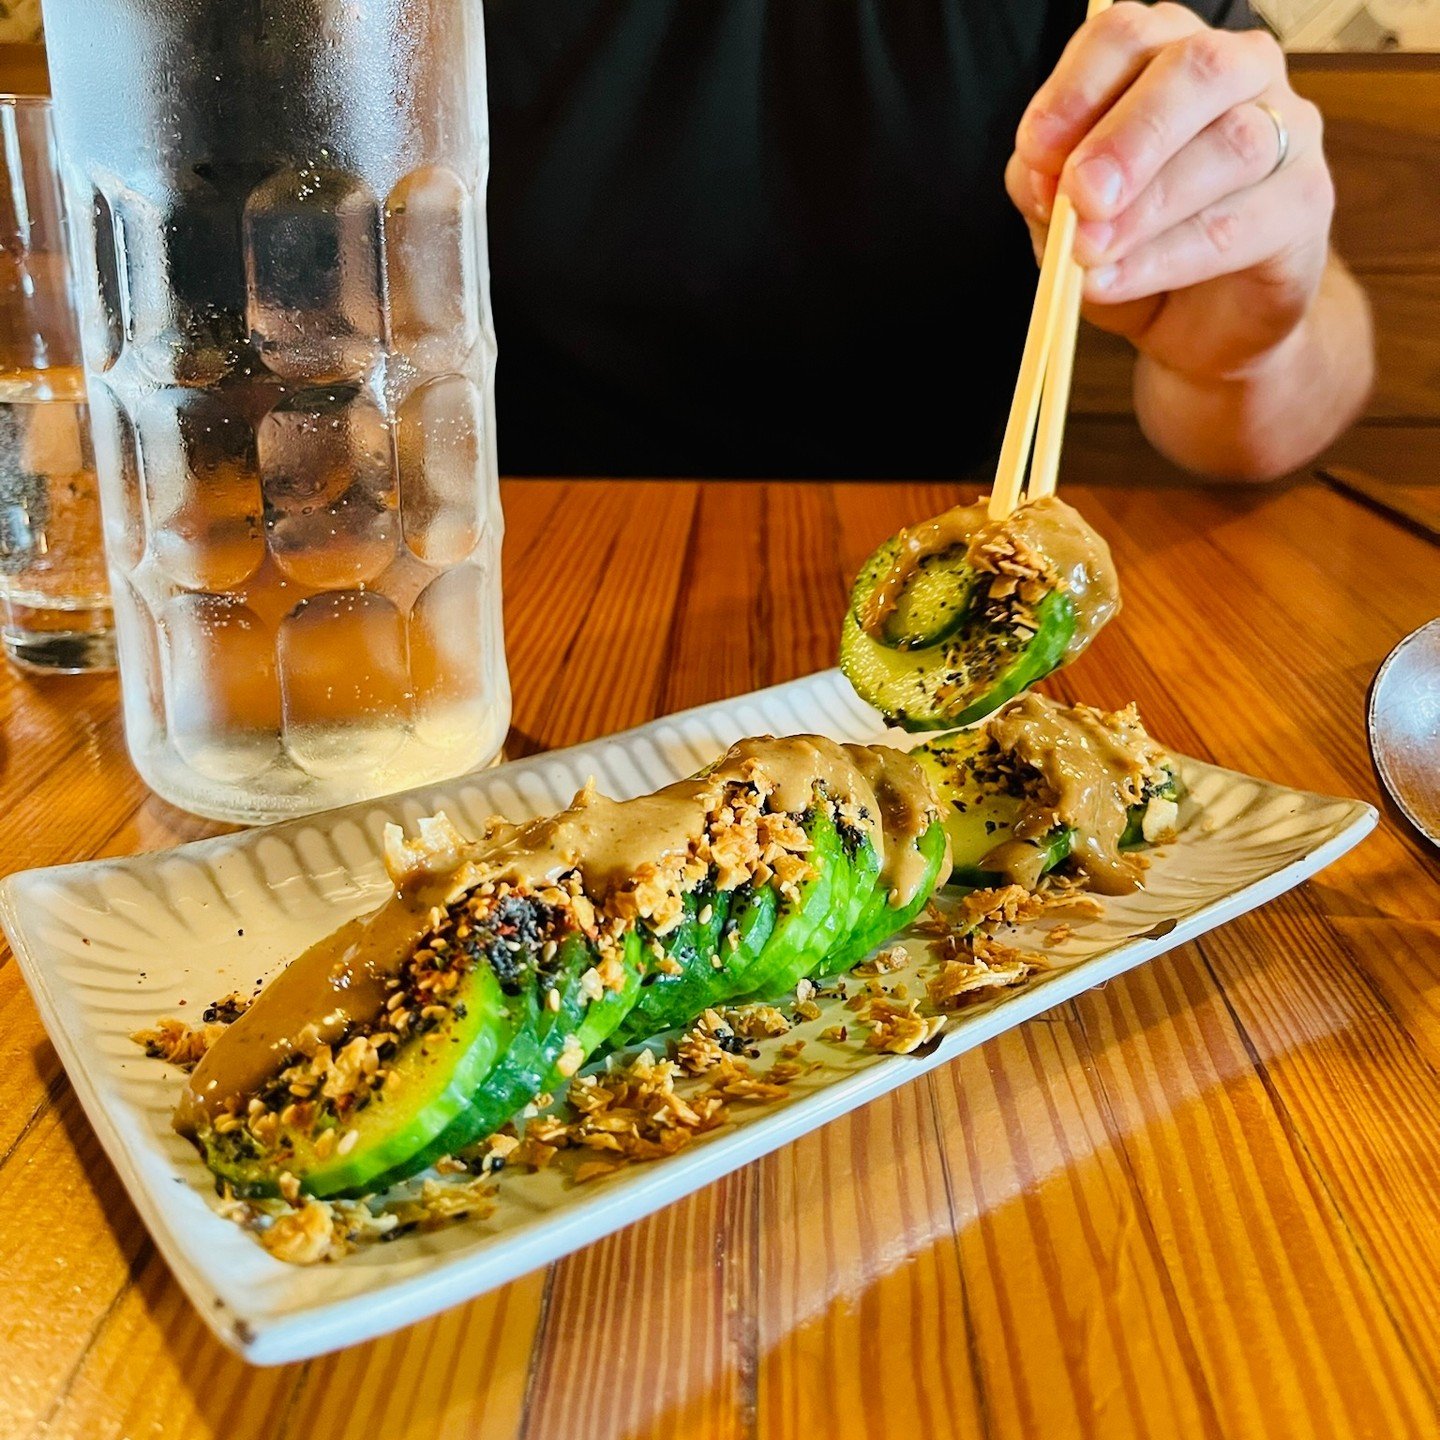 Thinking about a quick bite to eat? Our Japanese cucumber is the way to go! This yummy snack is topped with our sesame seasoning, garlic chips, &amp; togarashi 🩷🥒